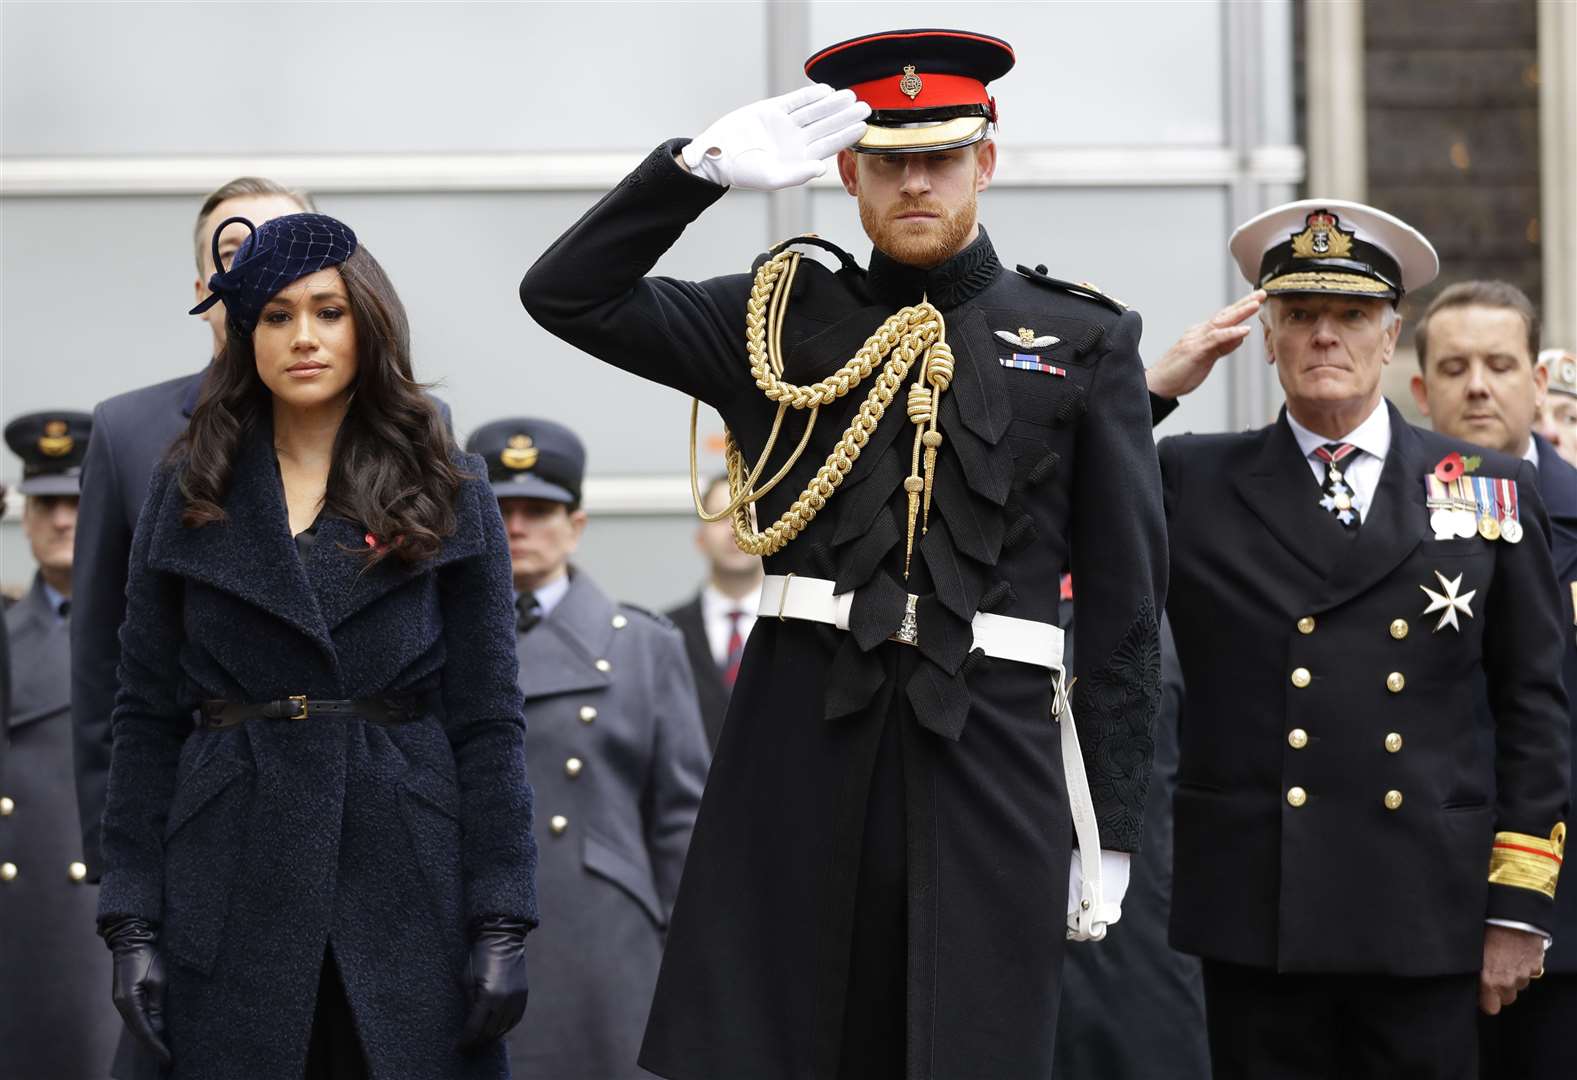 As senior royals, the Duke and Duchess of Sussex visited the Field of Remembrance at Westminster Abbey (Kirsty Wigglesworth/PA)